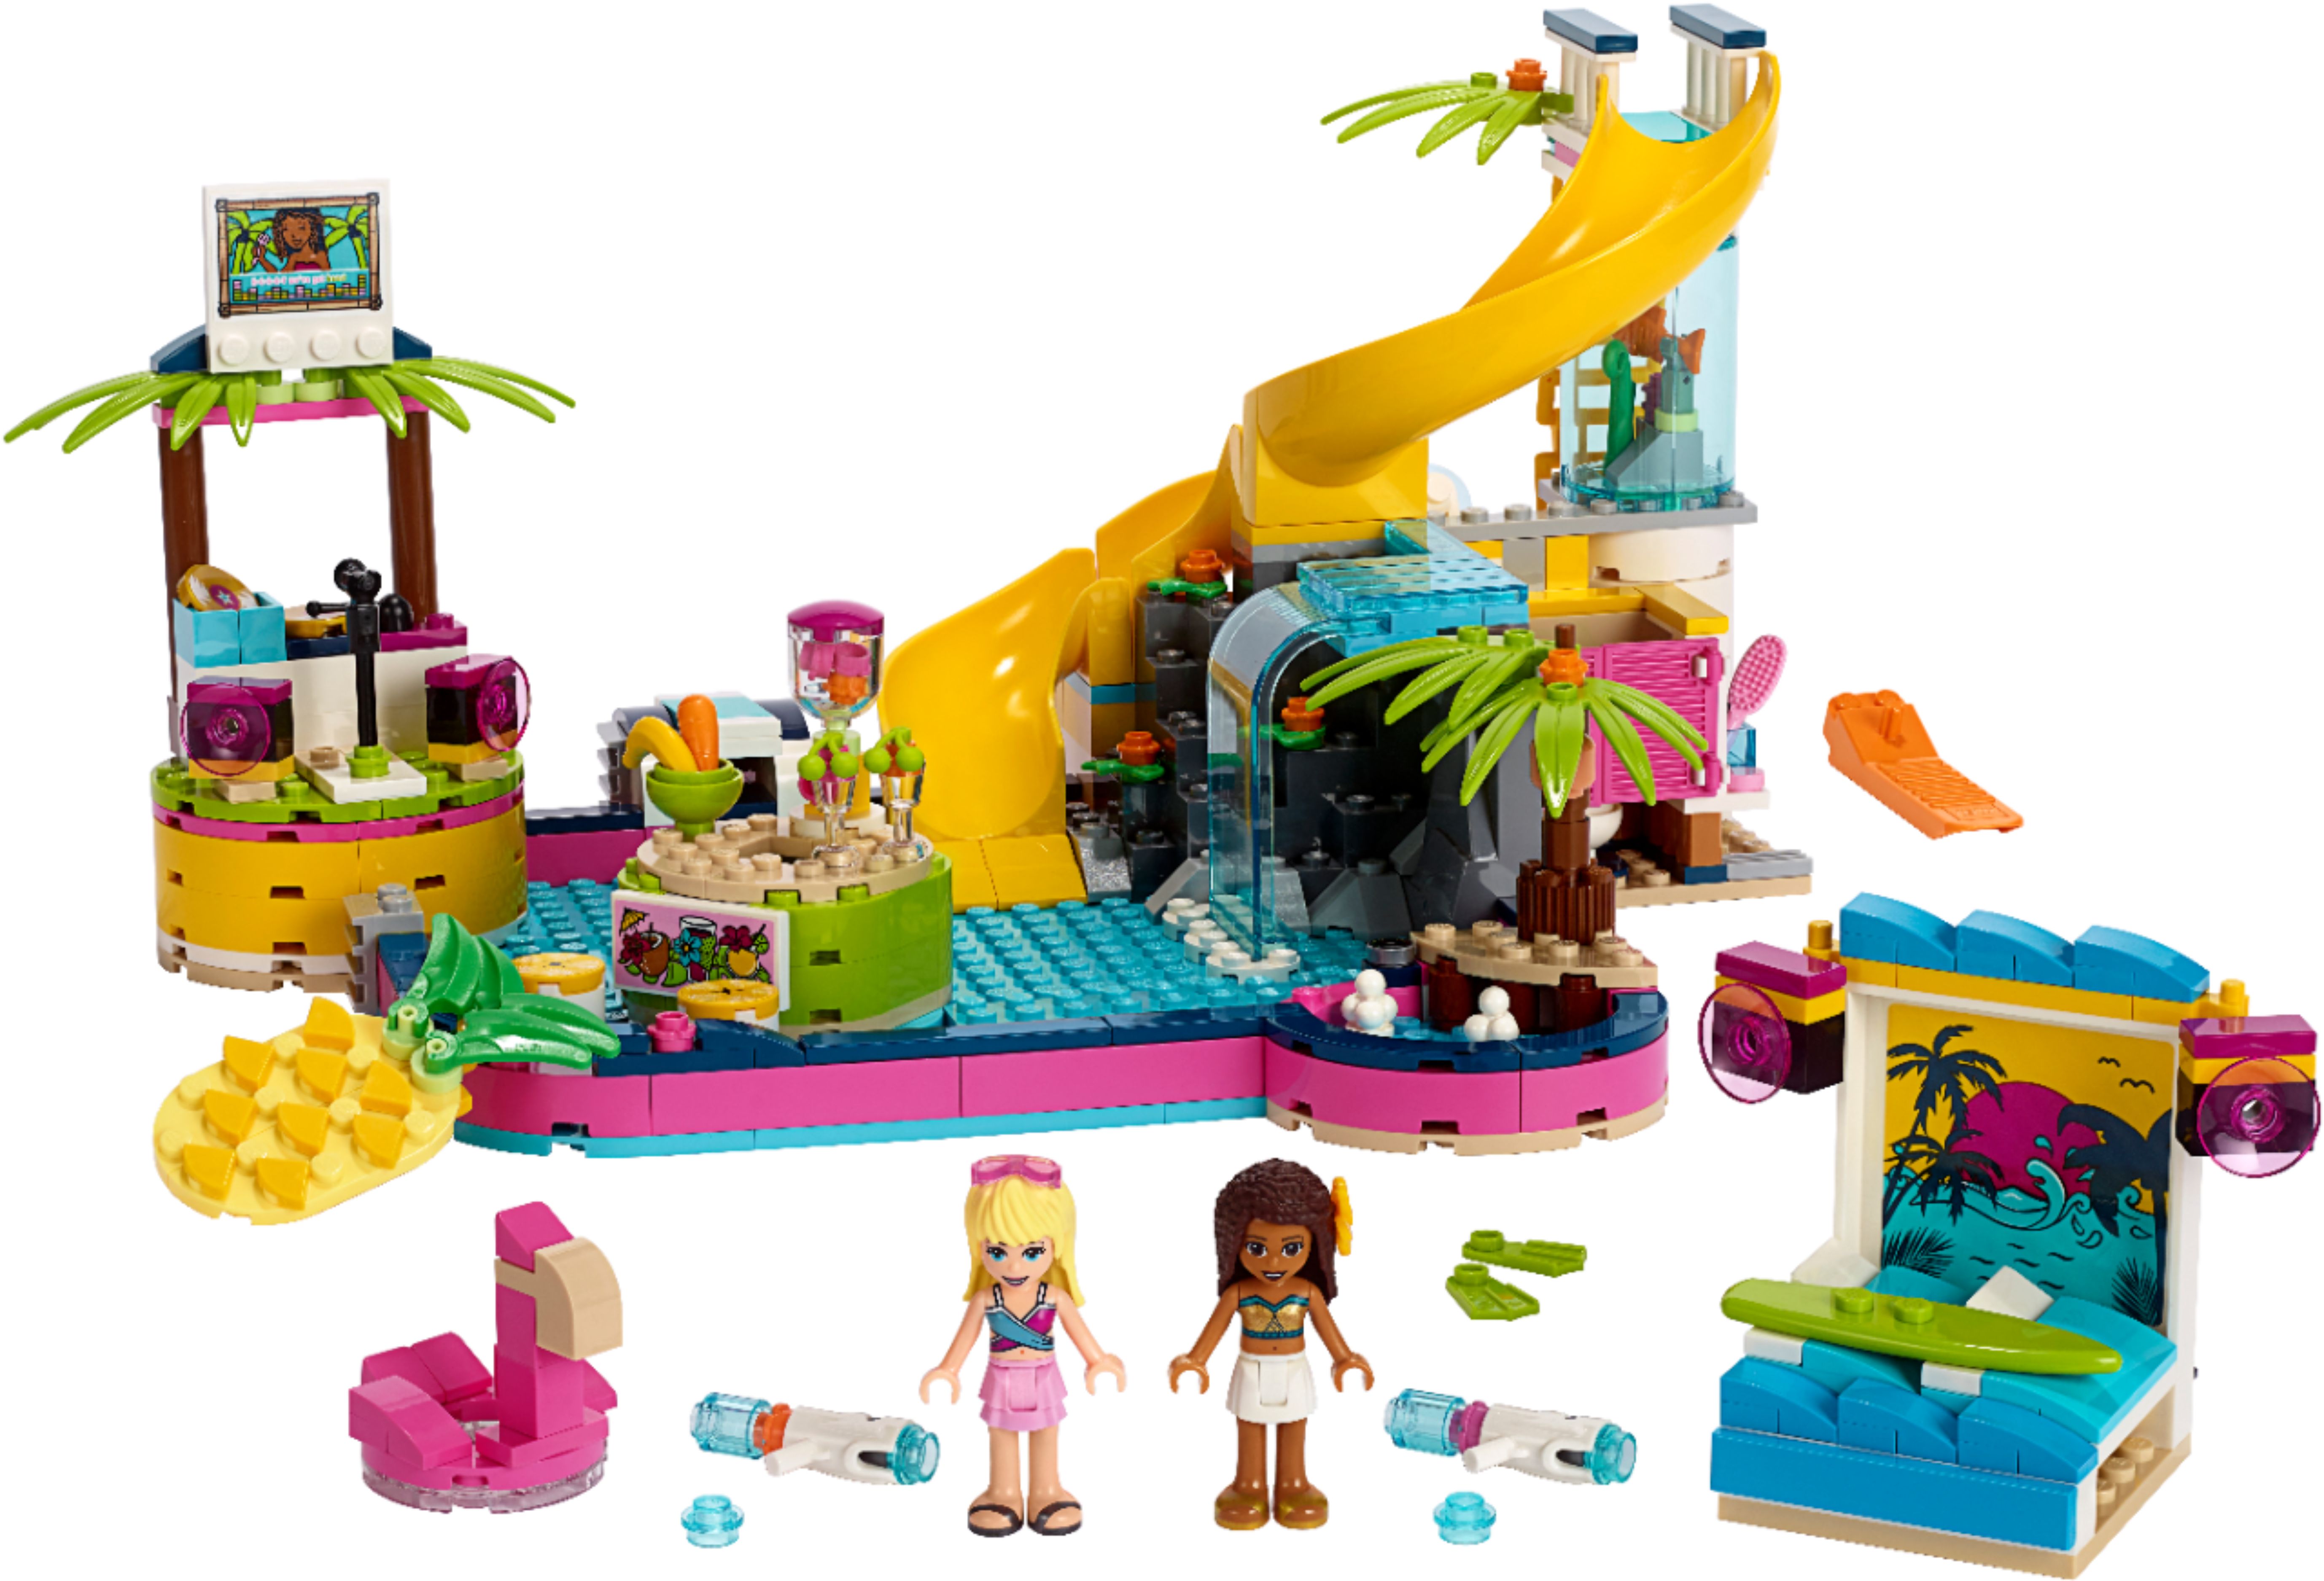 LEGO Friends Andrea's Pool Party Building Set - wide 1